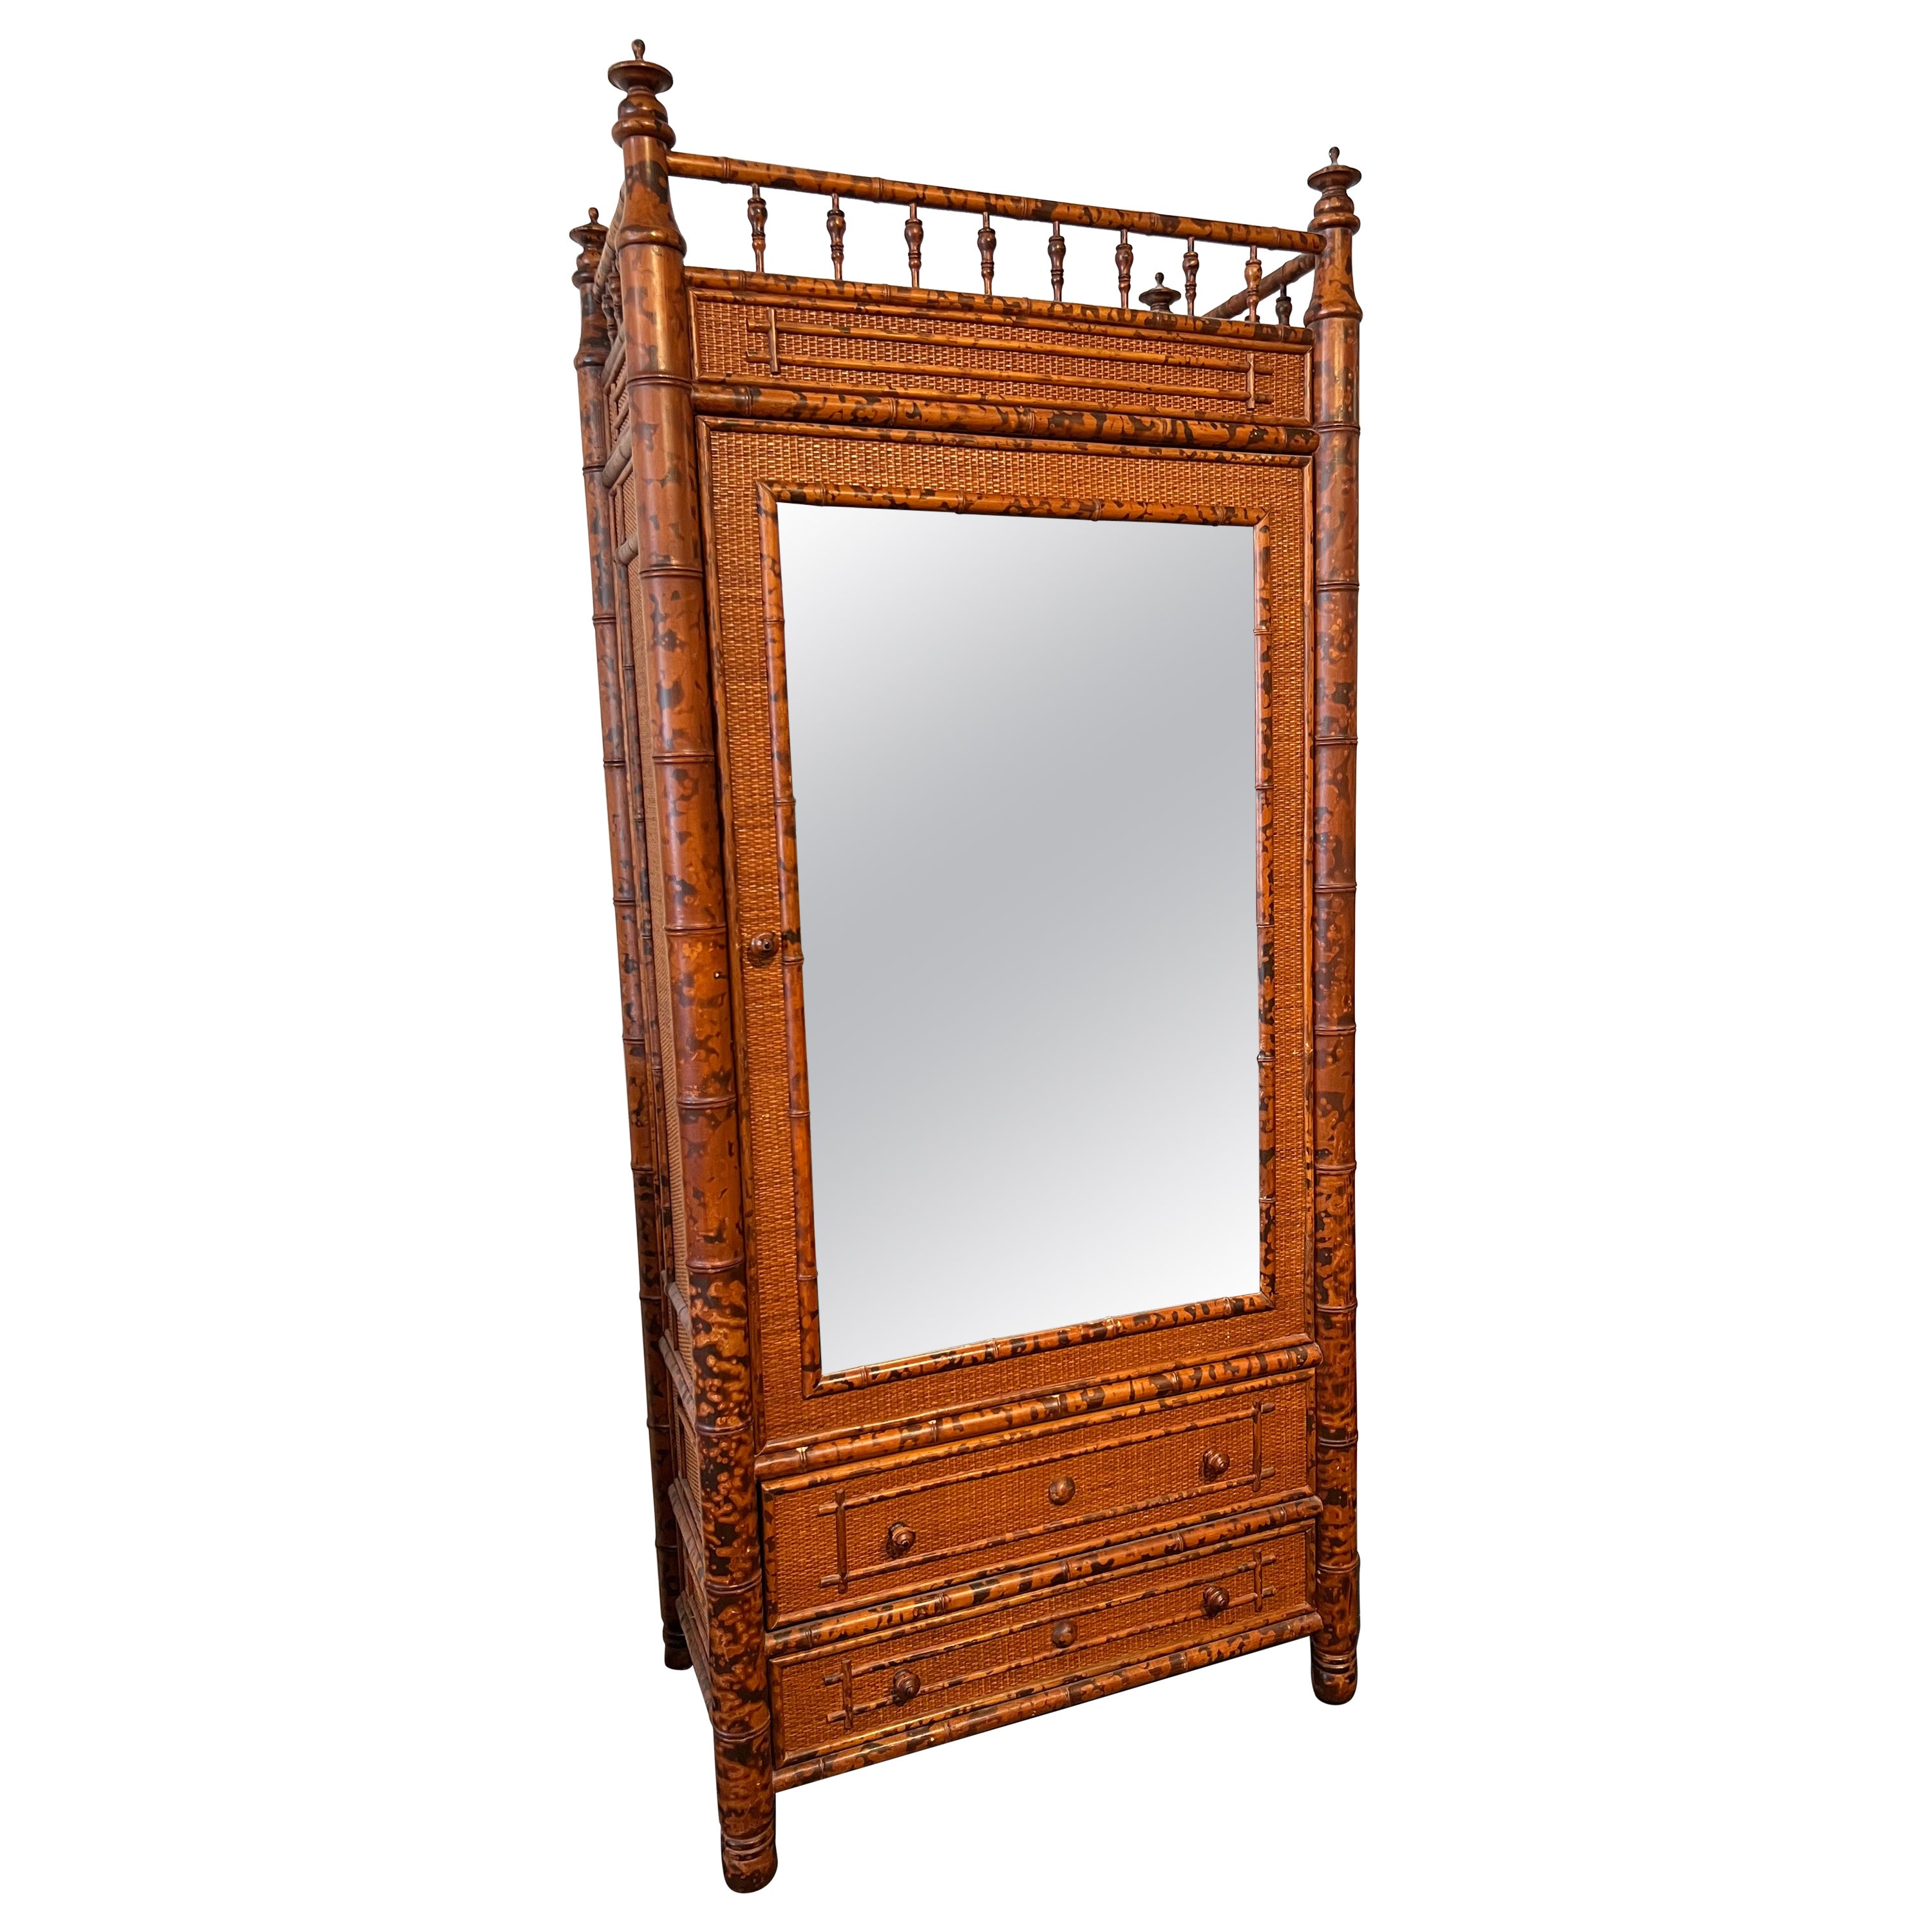 British Colonial Style Burnt Bamboo and Cane Armoire